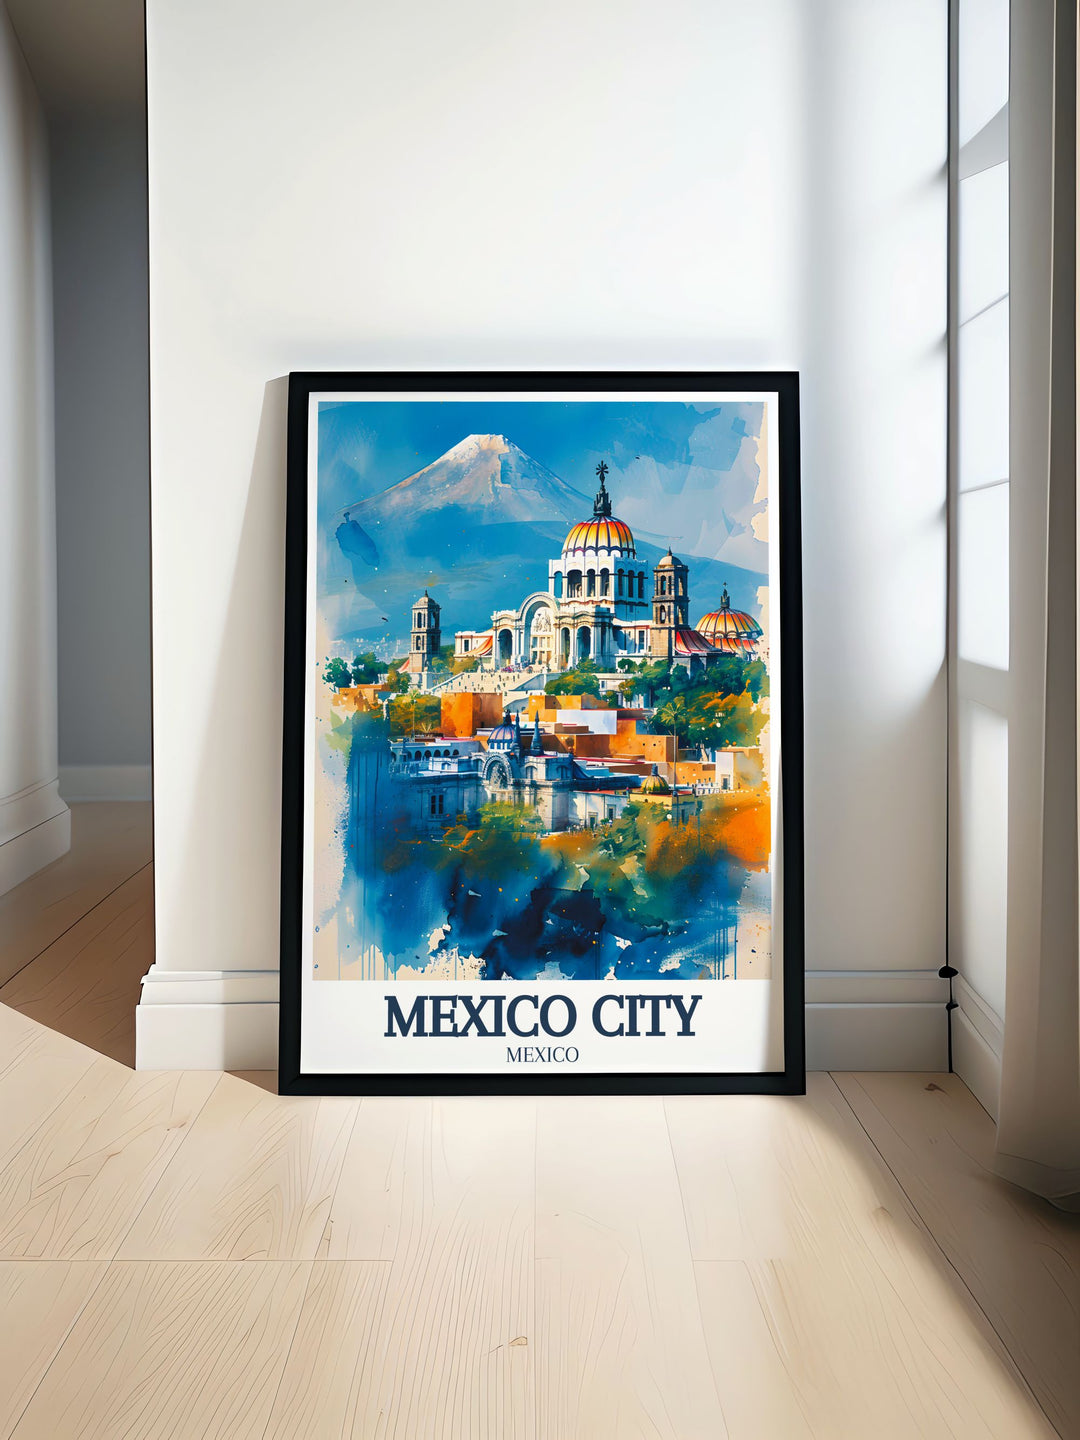 Metropolitan cathedral Zocalo Chapultepec castle wall art showcasing the iconic landmarks of Mexico City. Perfect for adding a touch of Mexican culture and history to your home decor with vibrant colors and detailed artwork. Ideal for travel enthusiasts and art lovers alike.